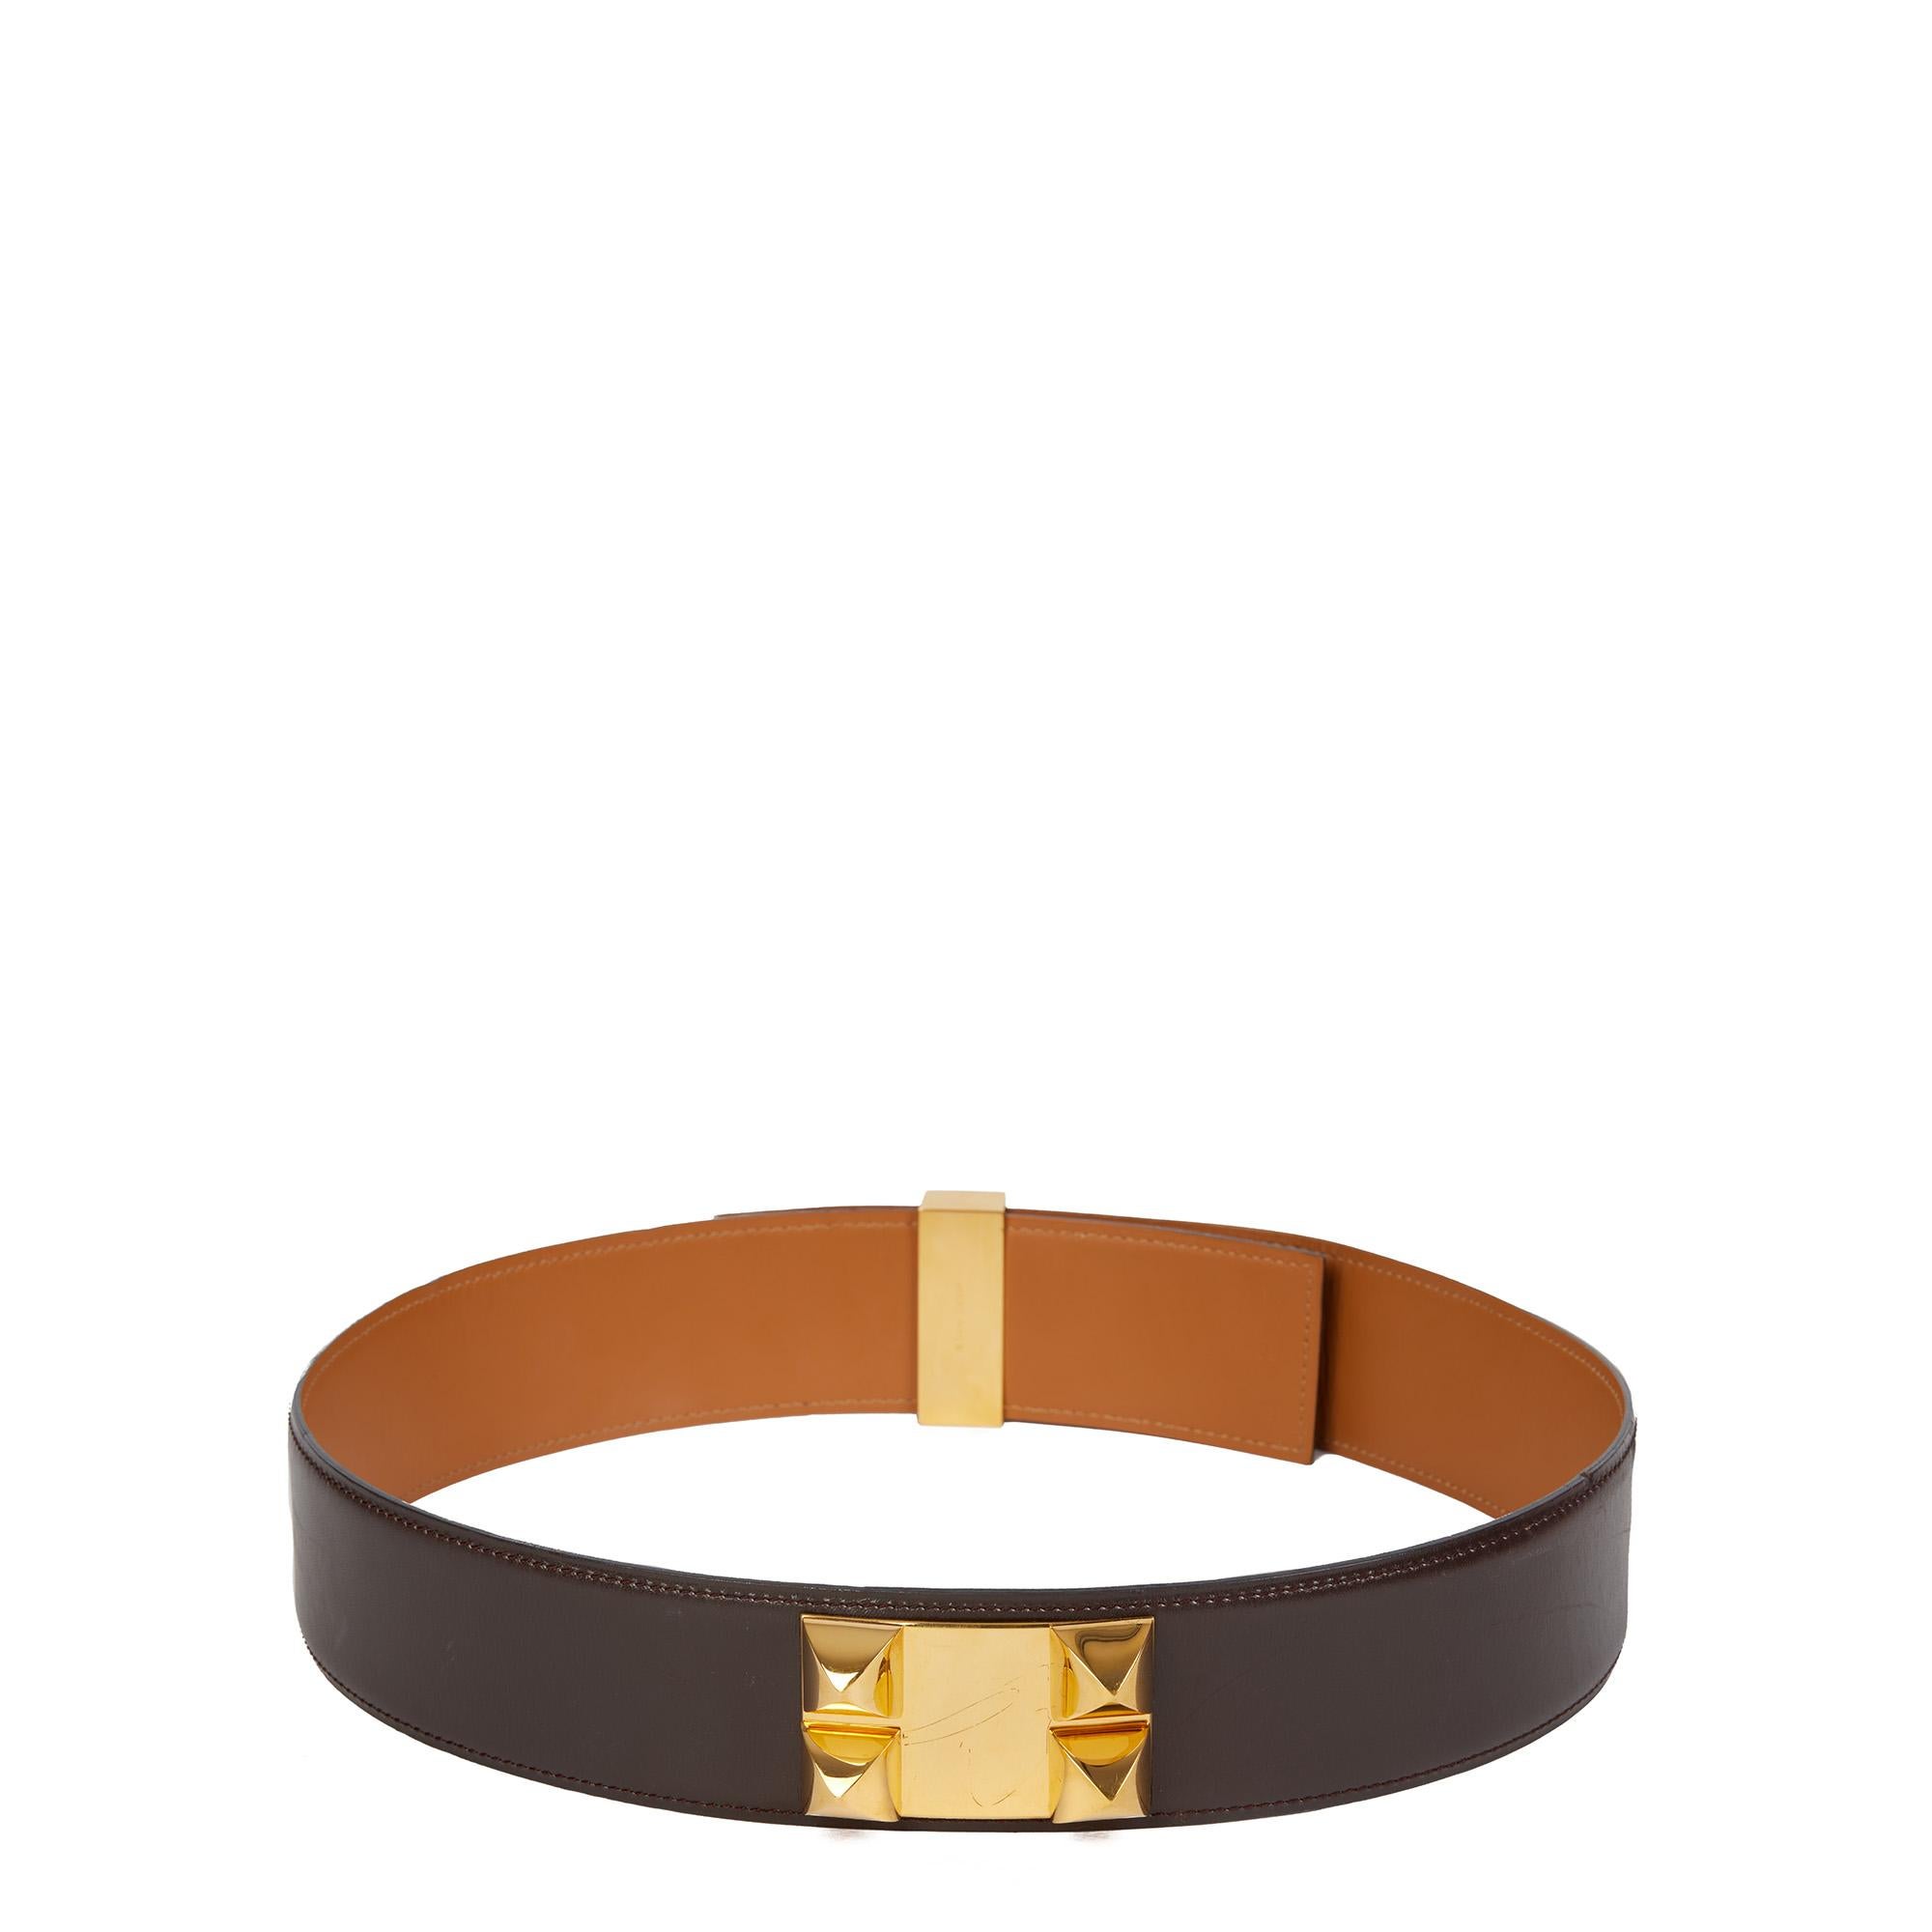 Hermès EBENE BOX CALF LEATHER COLLIER DE CHIEN BELT

CONDITION NOTES
The exterior is in good condition with minimal signs of use.
Overall this item is in good pre-owned condition. Please note the majority of the items we sell are pre-loved unless